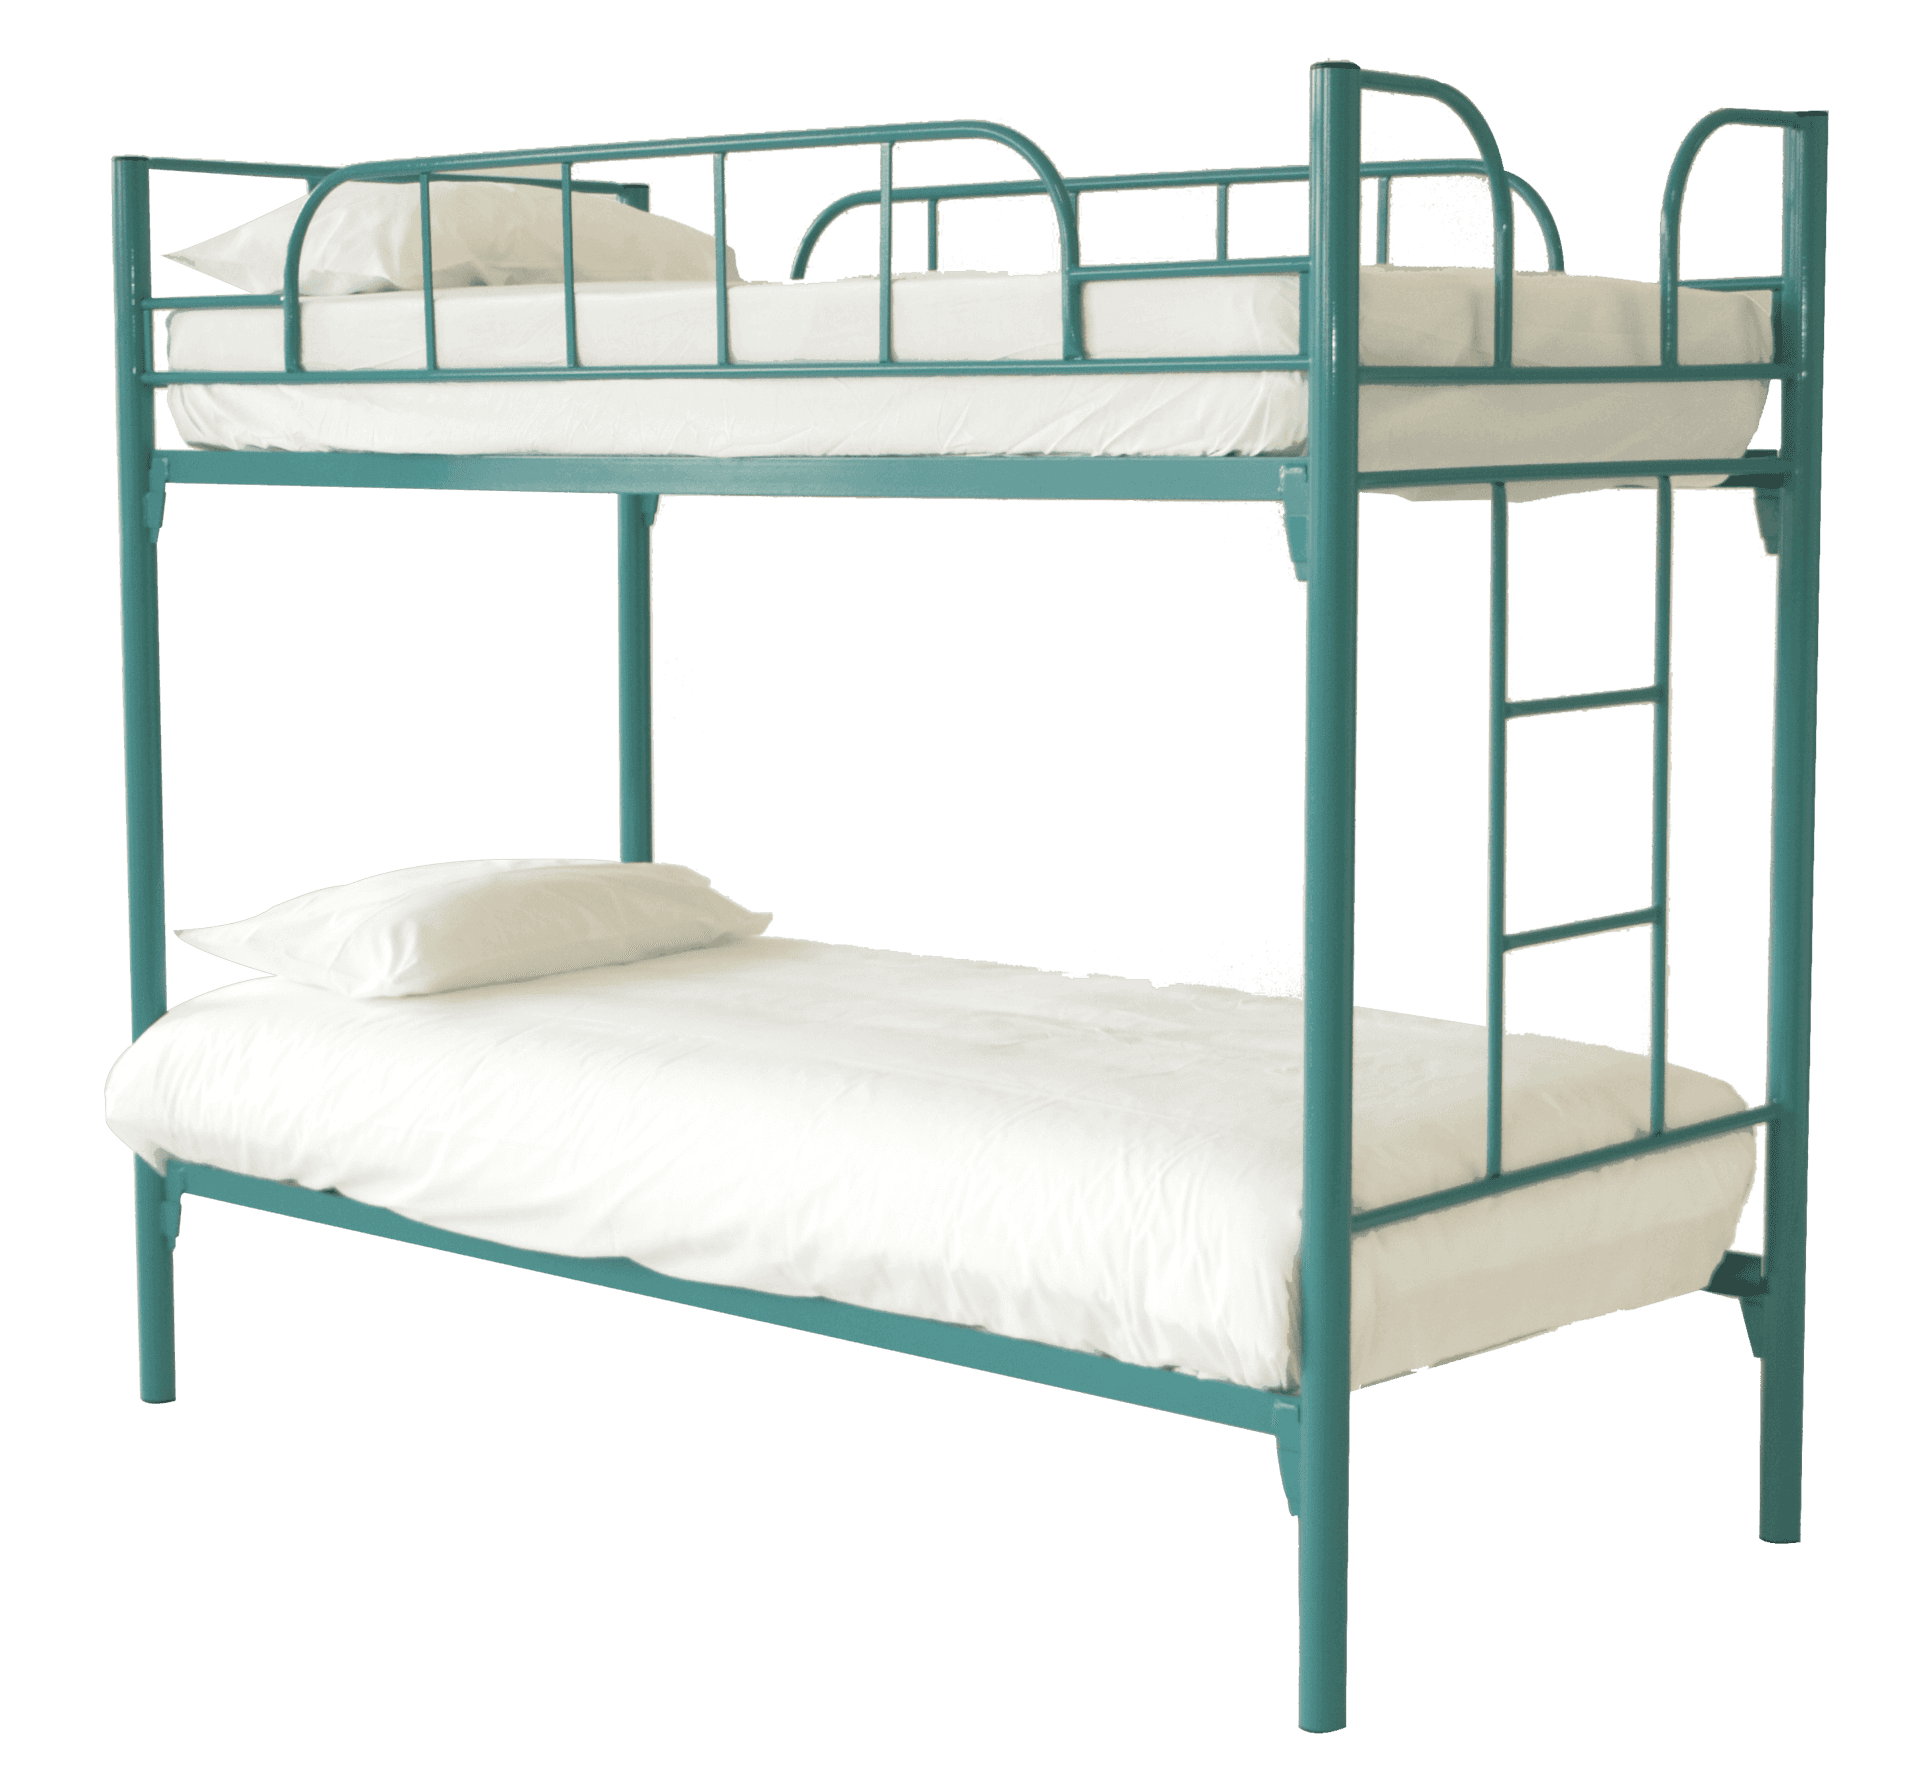 Bunk Bed Images Free Download PNG HQ PNG Image